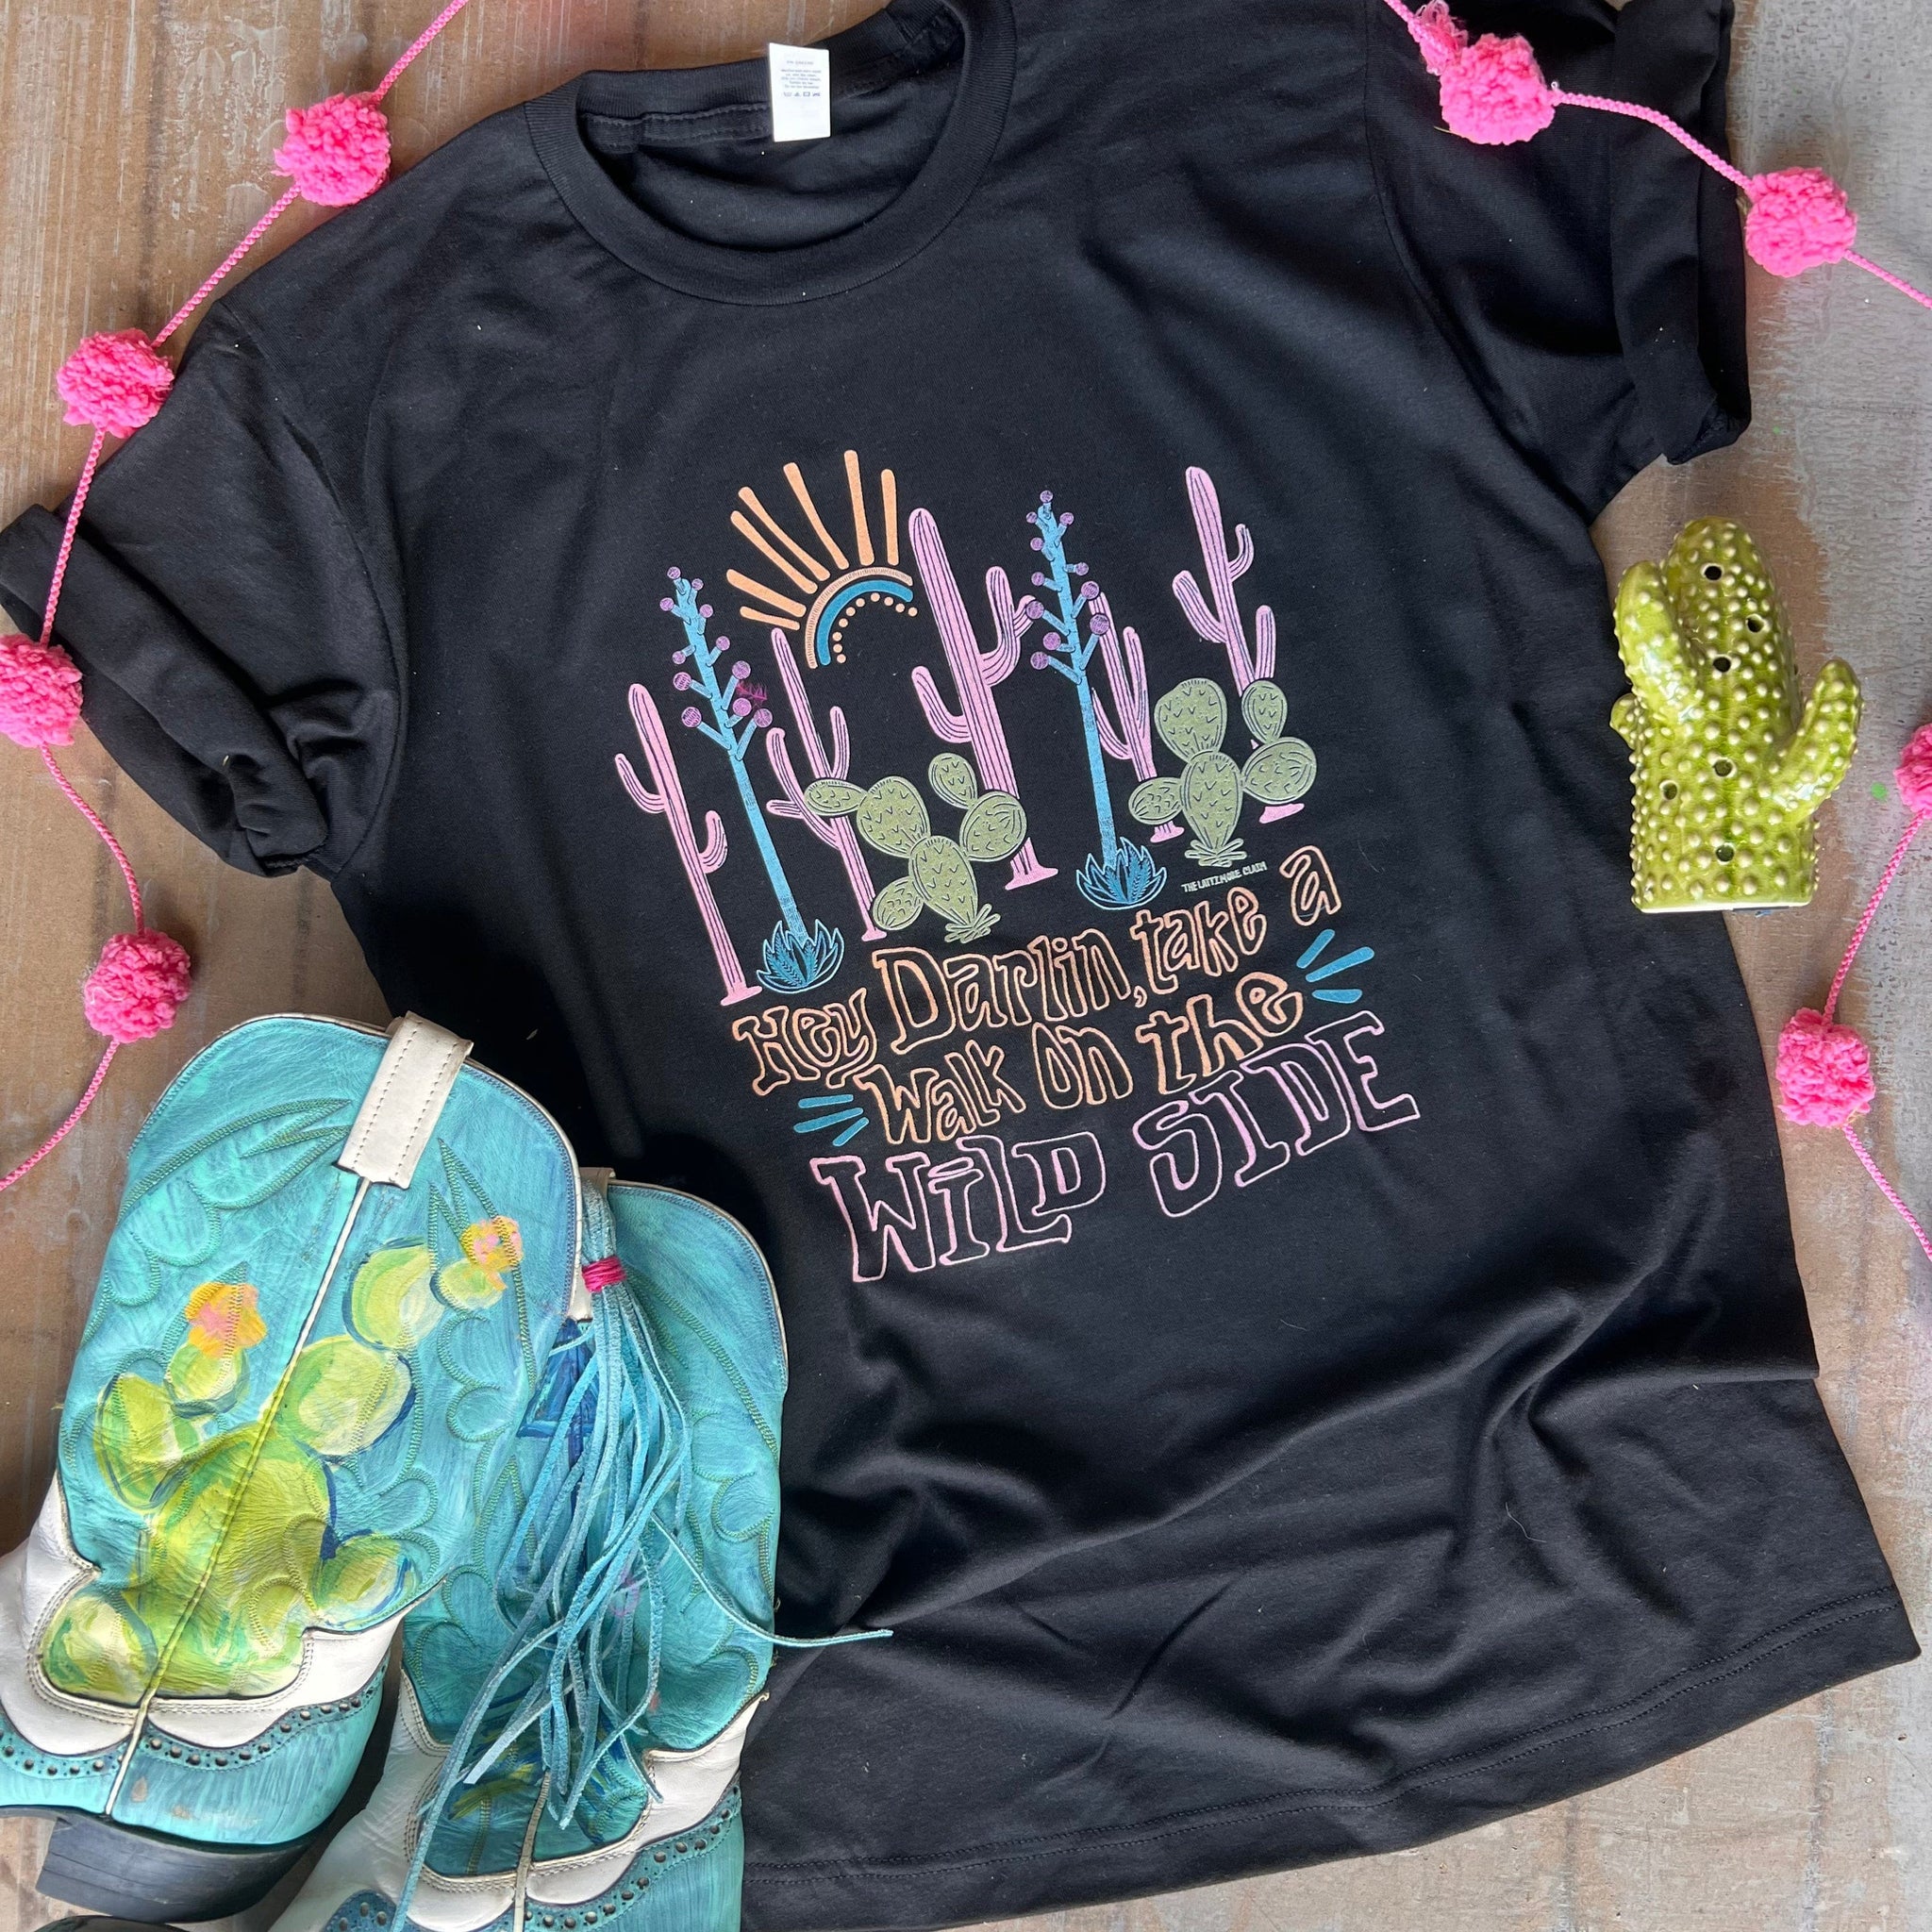 This Black Bella + Canvas tee includes a crew neckline, short sleeves, and a hand drawn graphic with words "hey darlin, take a walk on the wild side" in orange and pink. The graphic is a variety of colorful cacti and a partial sun. 